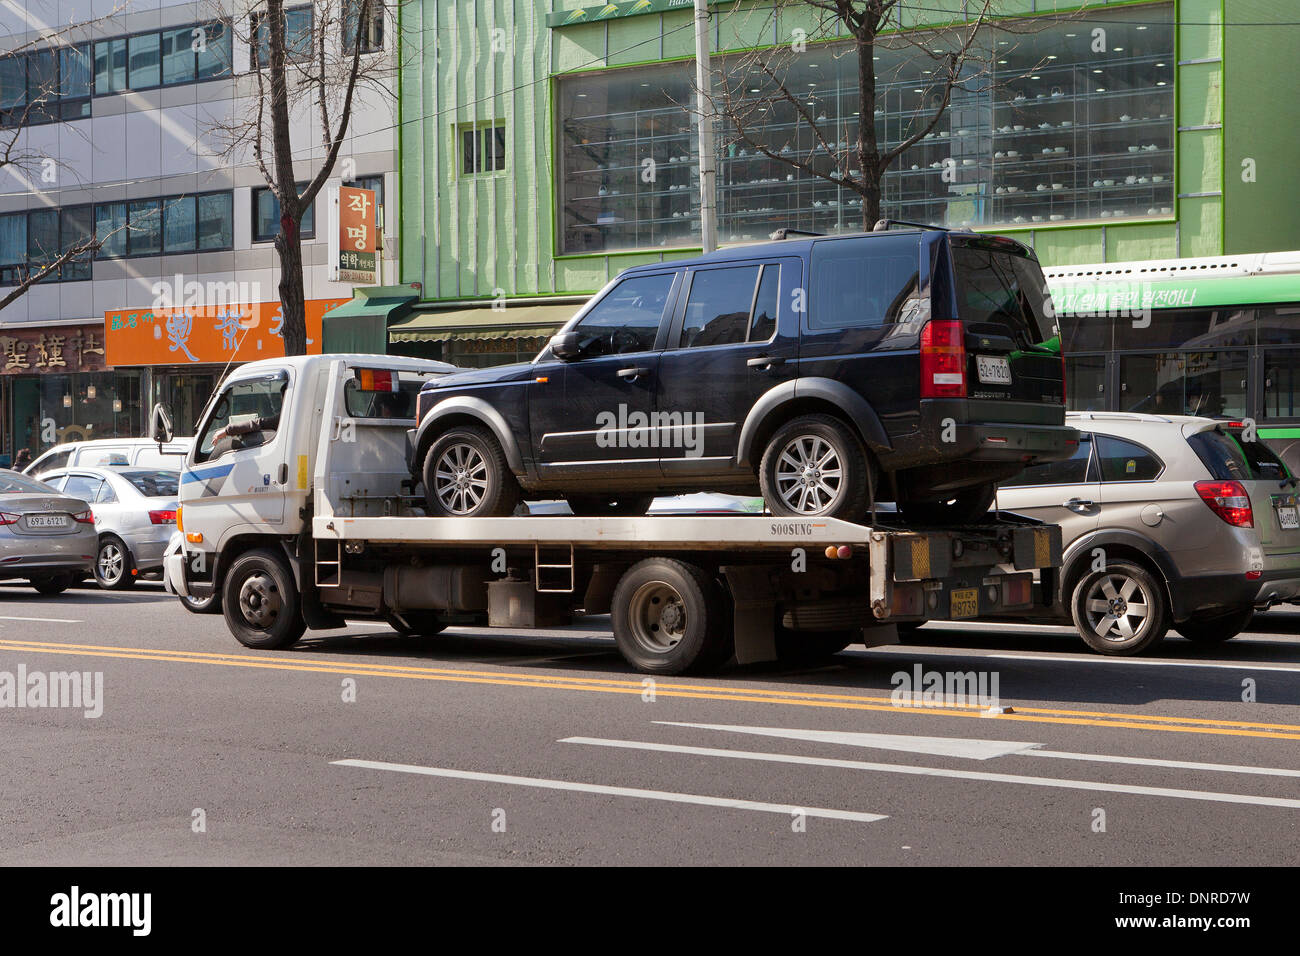 car-on-flatbed-tow-truck-seoul-south-kor